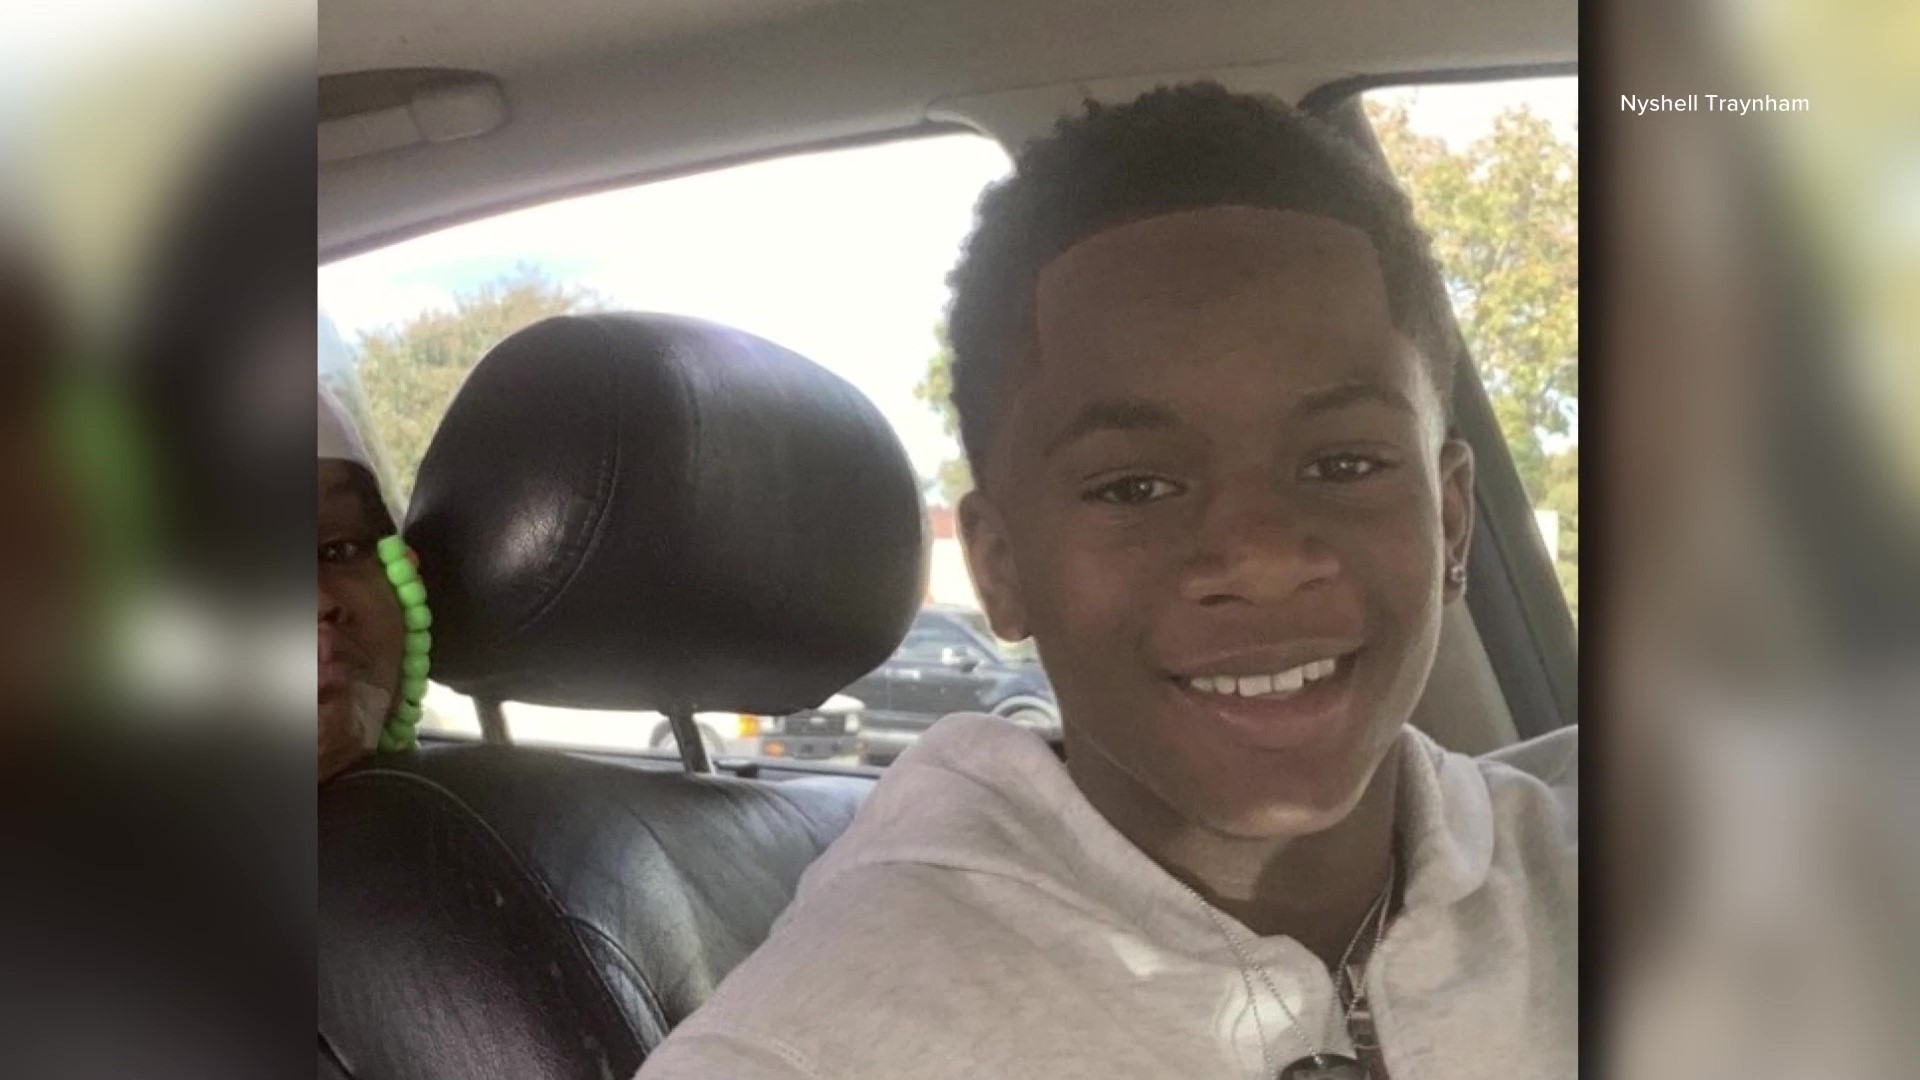 A Norfolk mother is grieving the loss of her 14-year-old son, Amir Burnett, after he was shot and killed Sunday afternoon.